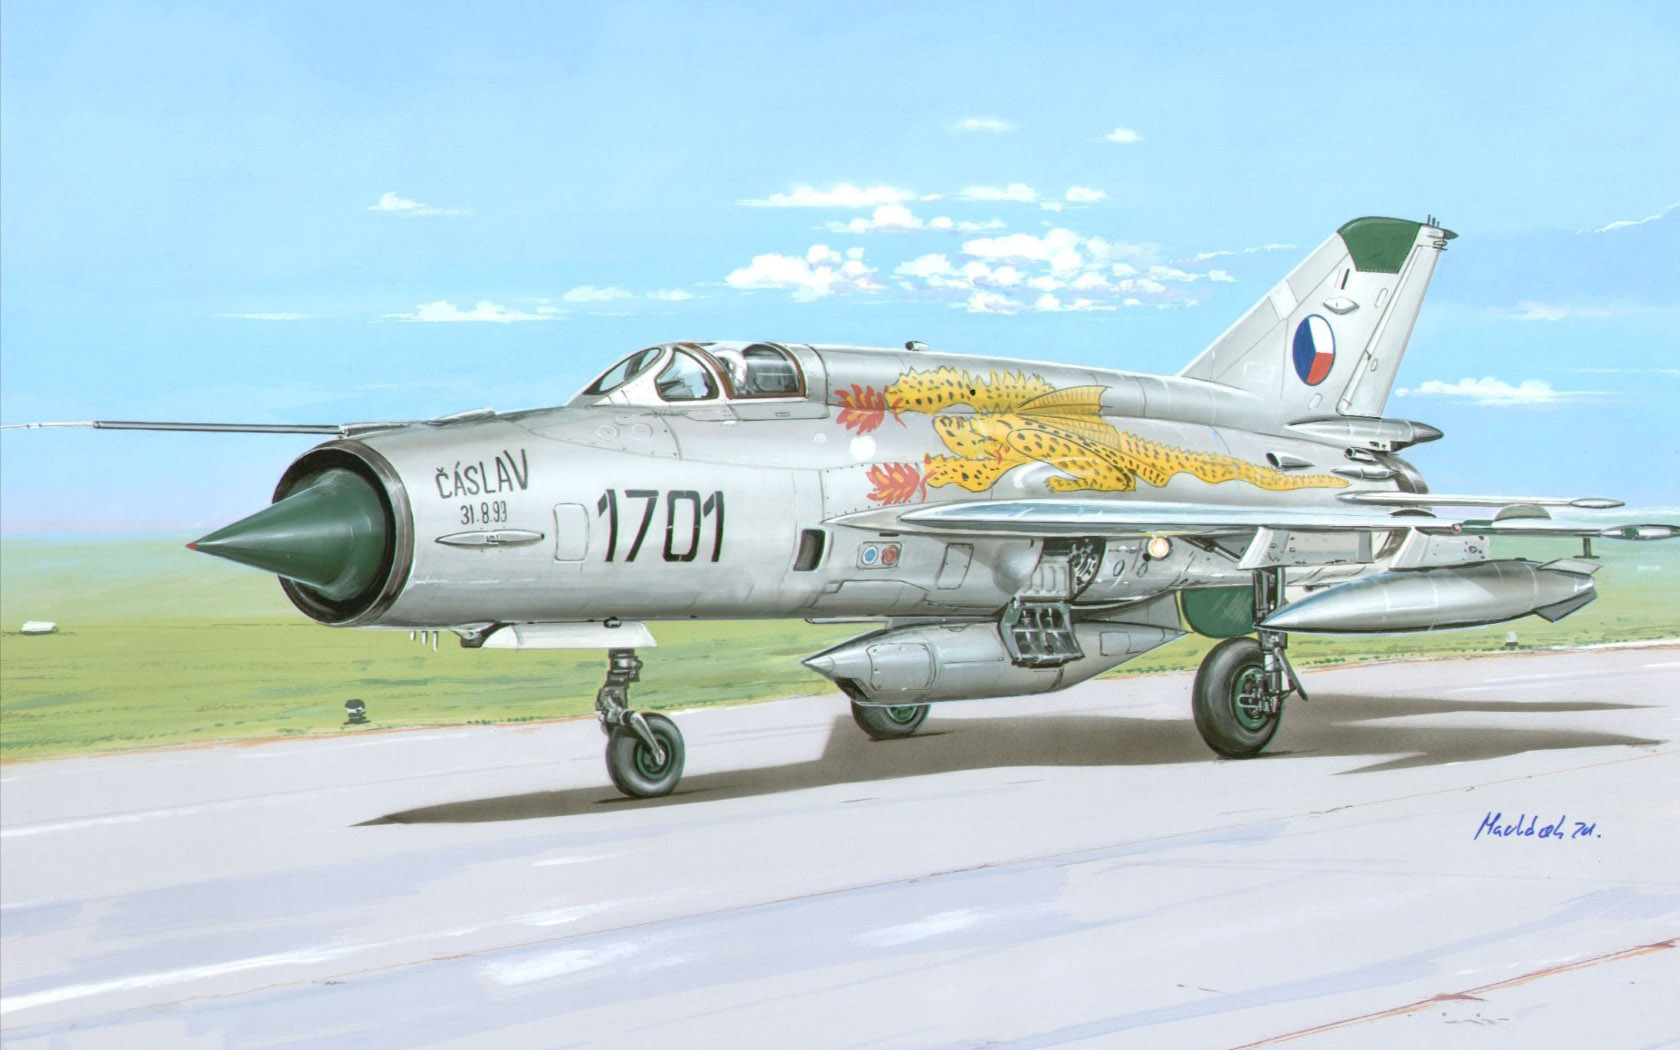 General 1680x1050 aircraft military military vehicle sky clouds artwork Czechoslovak Air Force Mikoyan-Gurevich MiG-21 signature Boxart dragon jet fighter